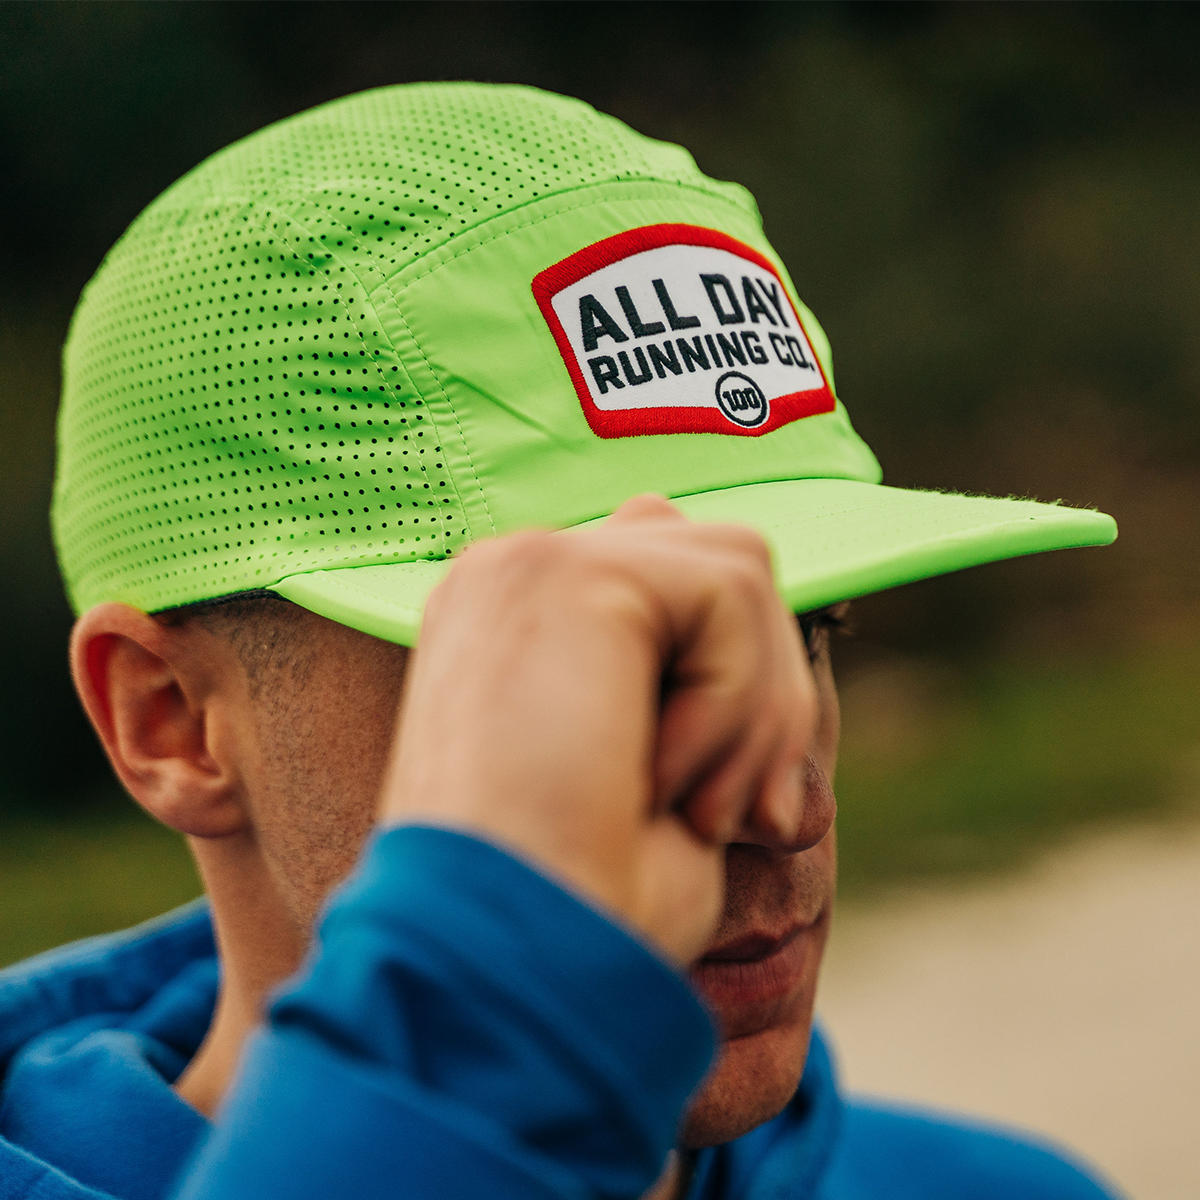 All Day Official Team Hat